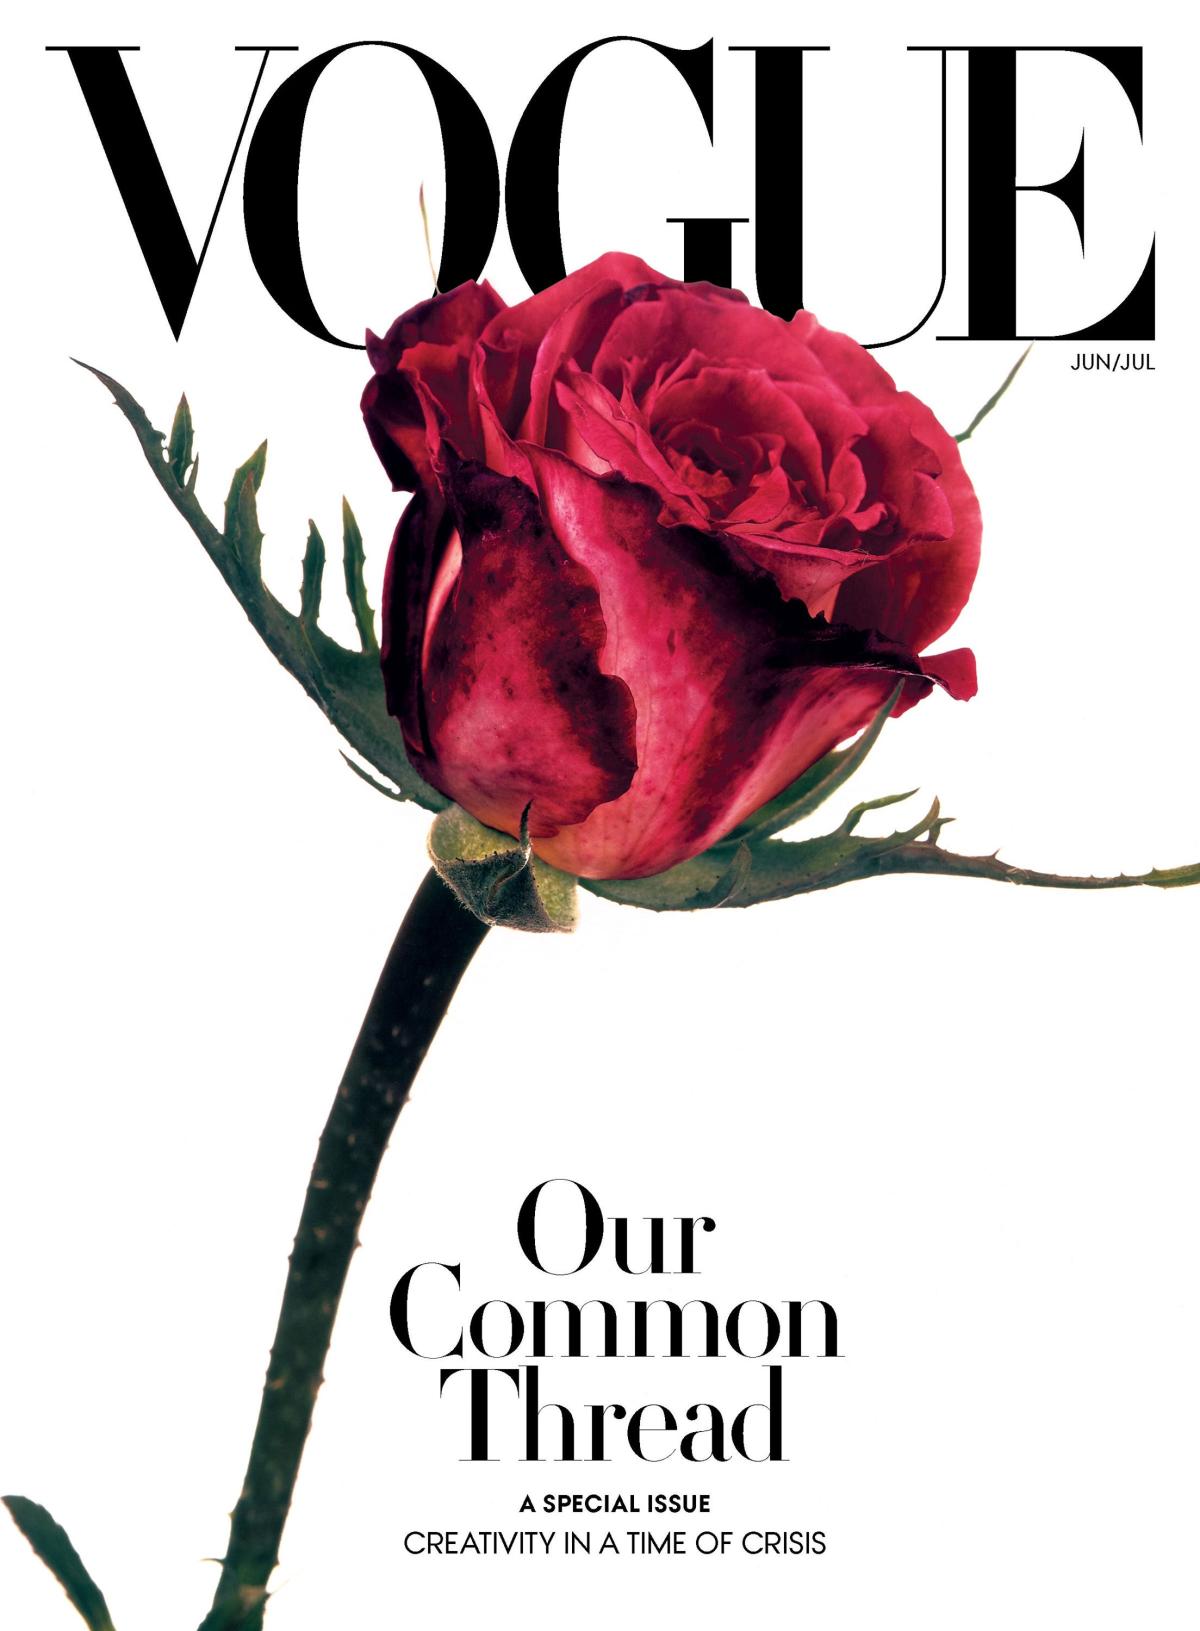 The Mighty Rose: The Story Behind Vogue 's June/July Cover